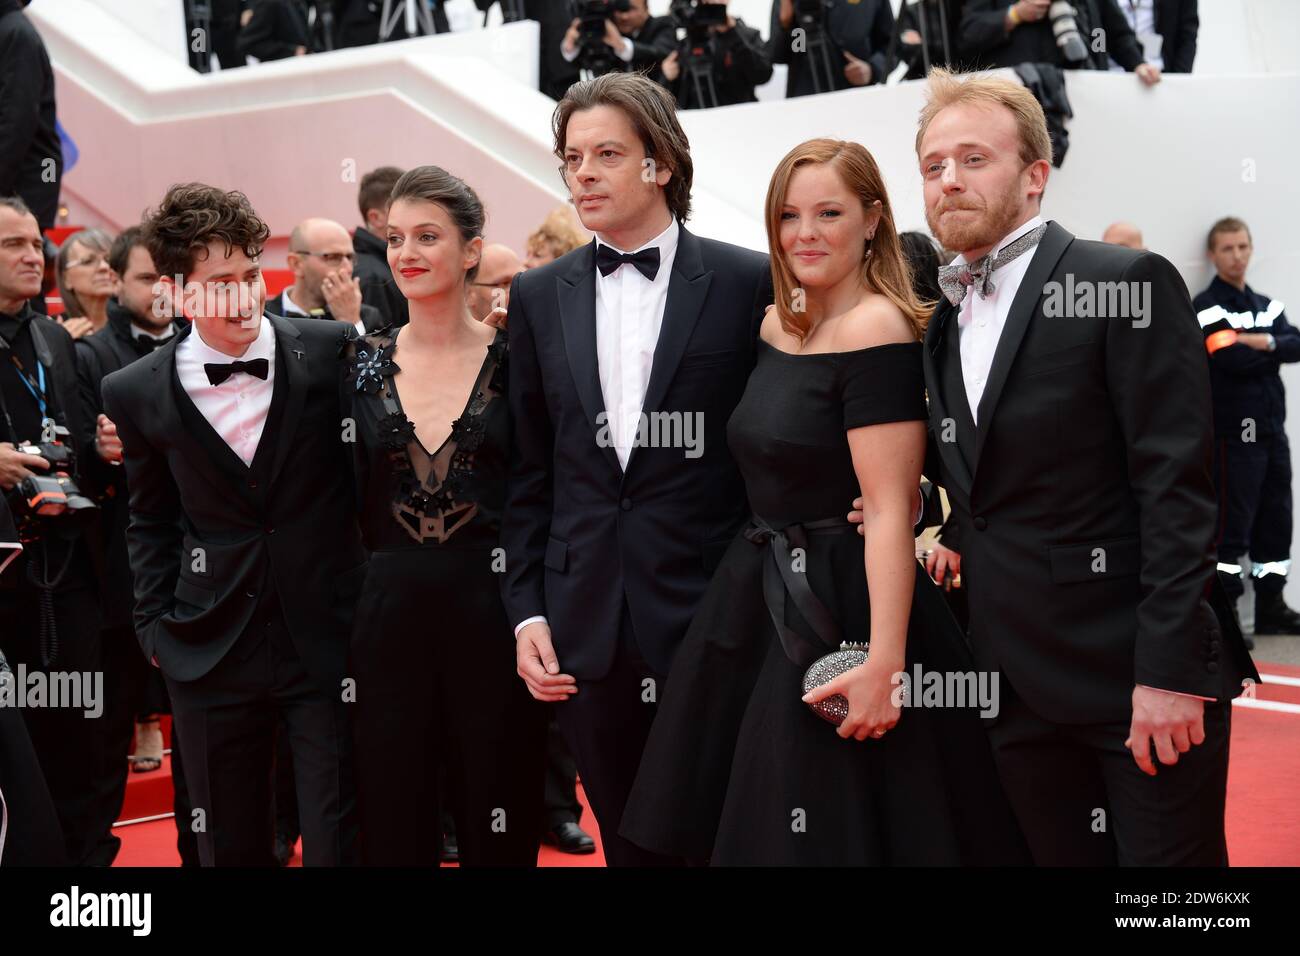 Benjamin Biolay and Barbara Probst arriving at the Palais Des Festivals for the screening of the film Foxcatcher as part of the 67th Cannes Film Festival at the in Cannes, France on May 19, 2014. Photo by Nicolas Briquet/ABACAPRESS.COM Stock Photo